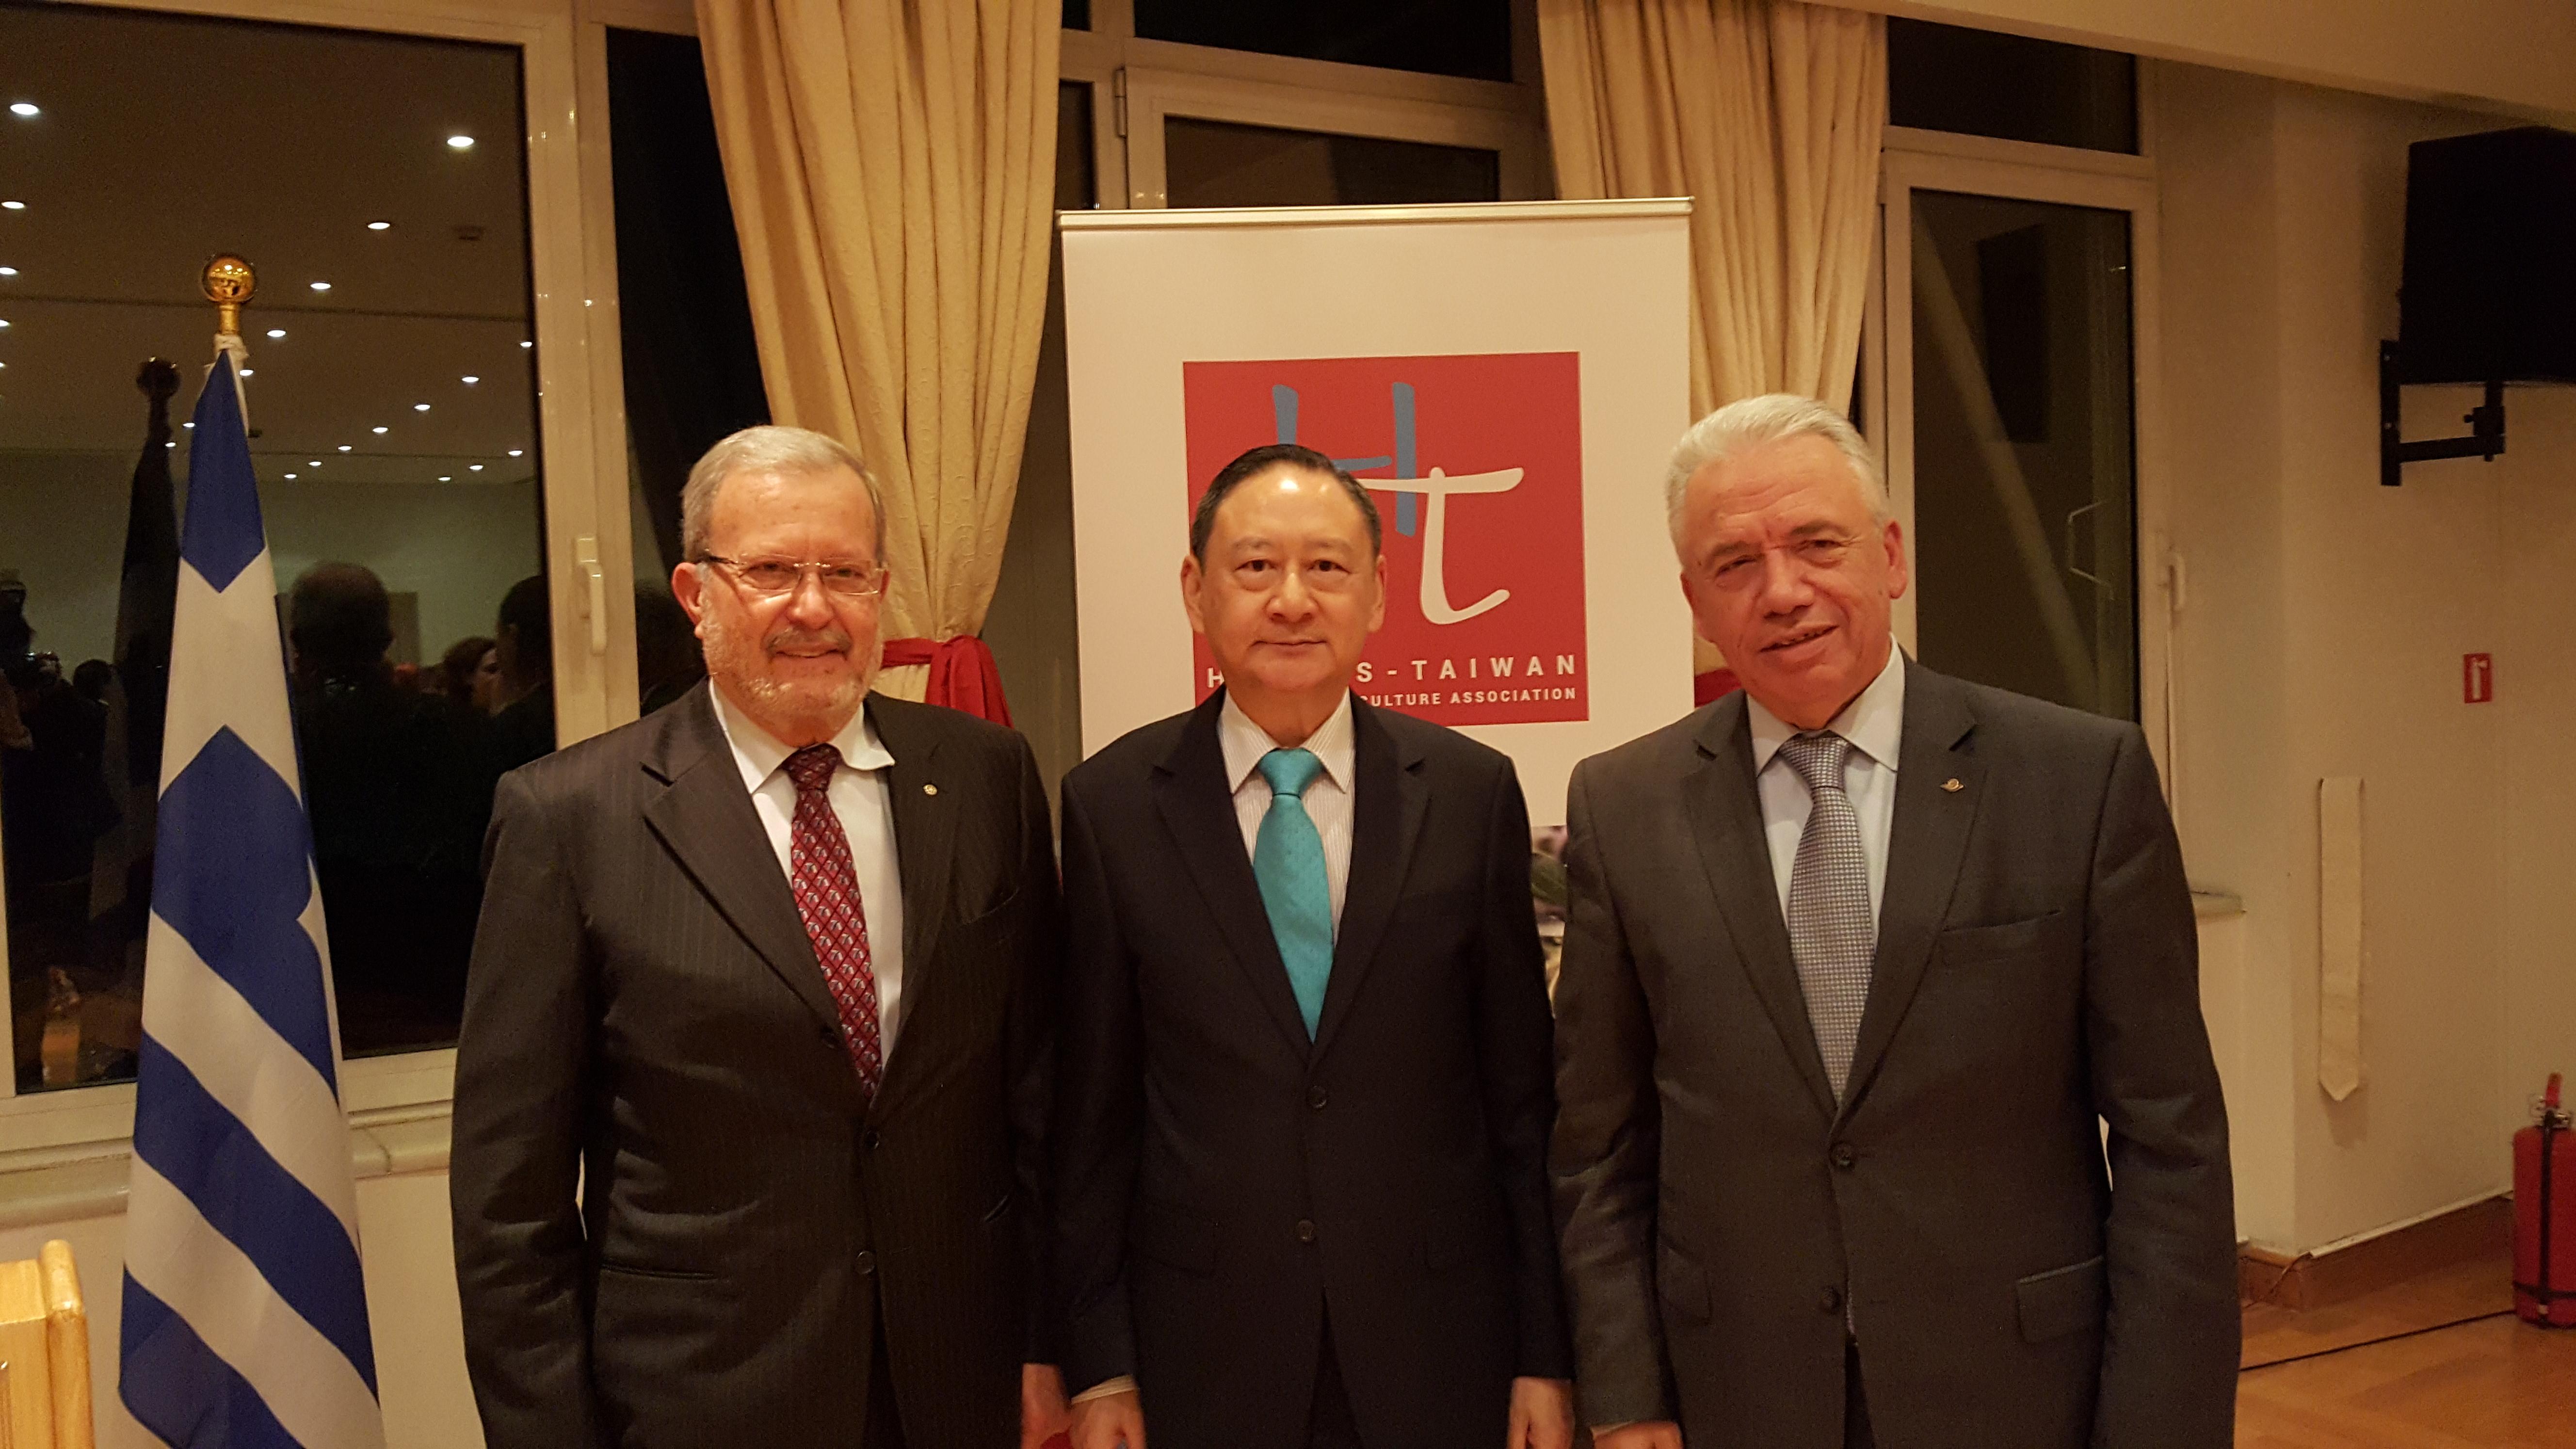 Amb. Sherman Kuo(center)with Ioannis Iliakis(left)and Ioannis Katsoyannis(right) at the inauguration of the Hellas-Taiwan Business and Culture Association March 15, 2018